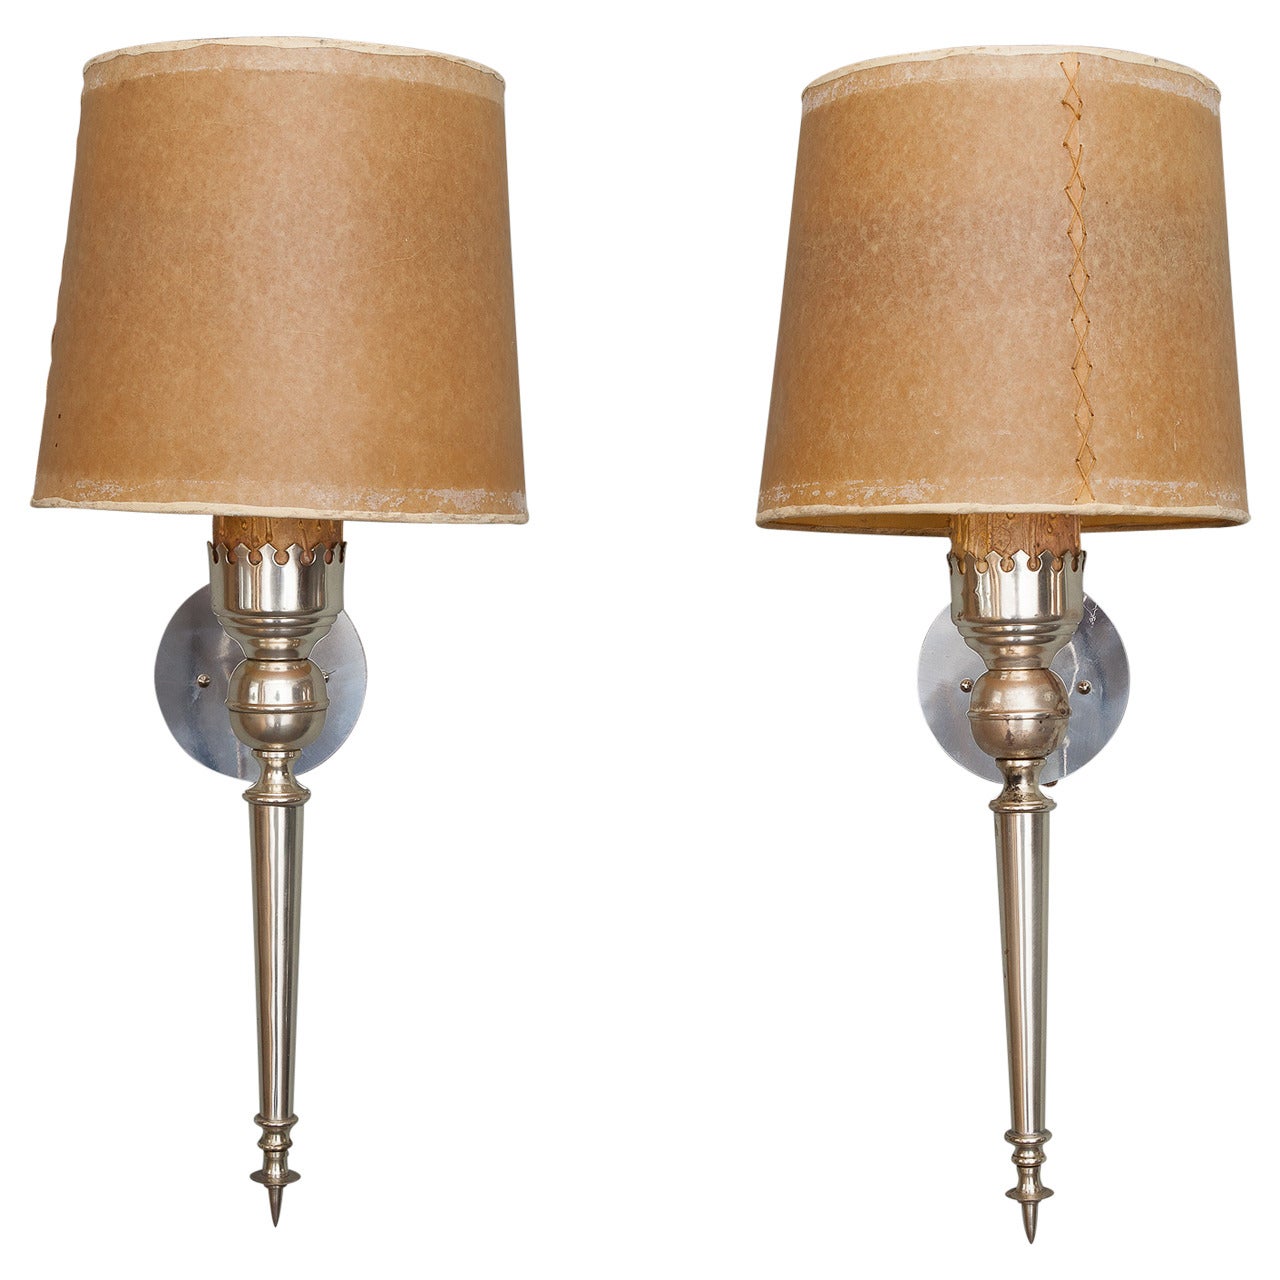 Pair Silver Tone Italian Neoclassical Sconces with Shades